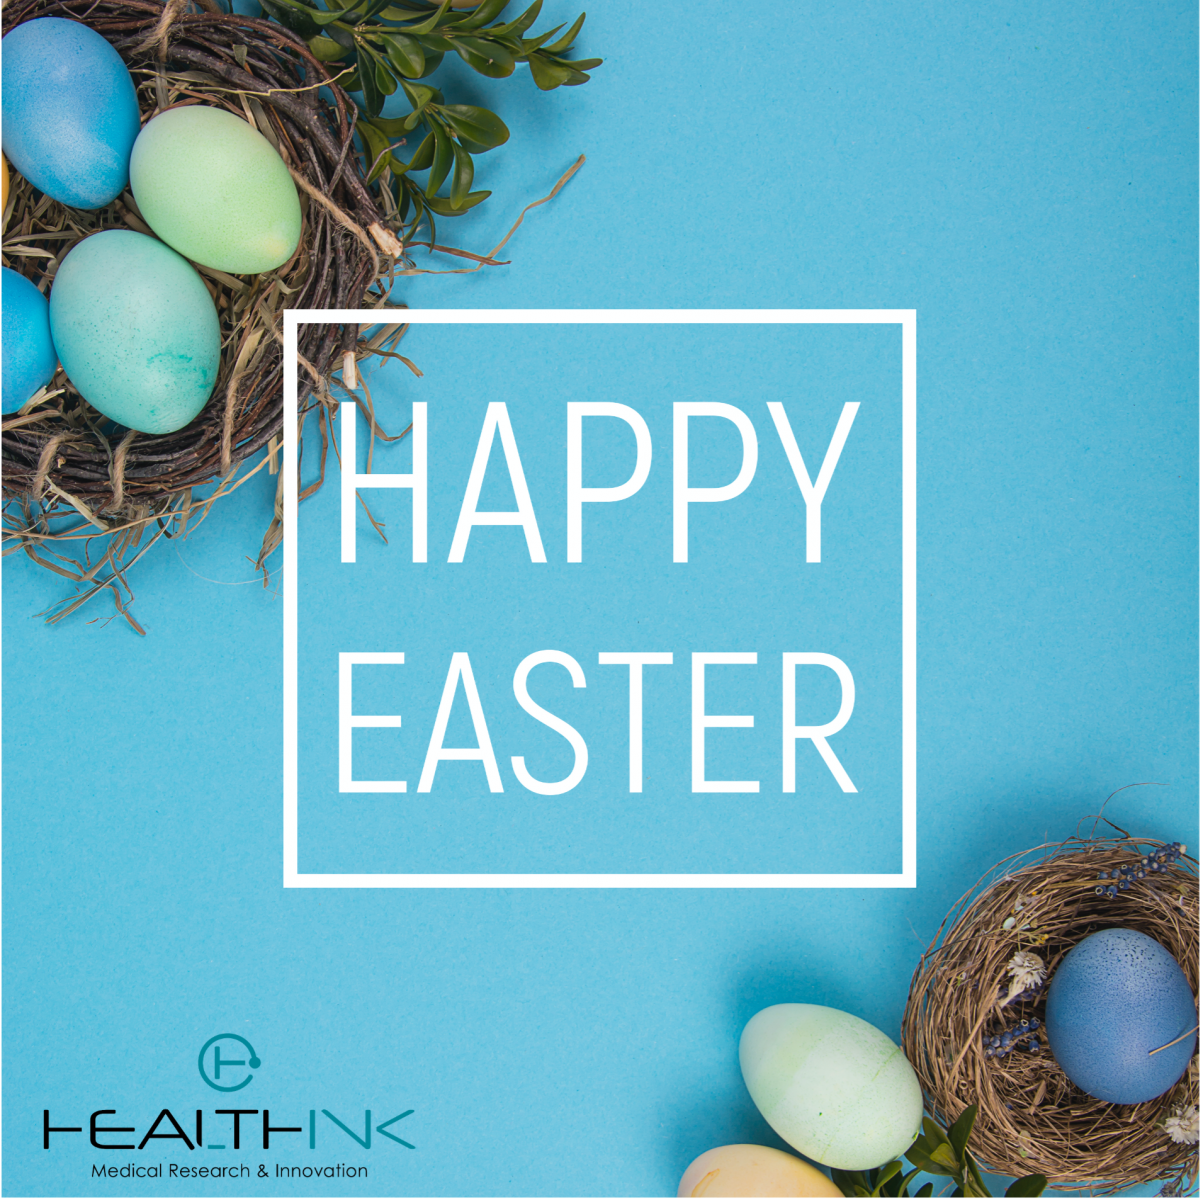 Easter Wishes from HealThink